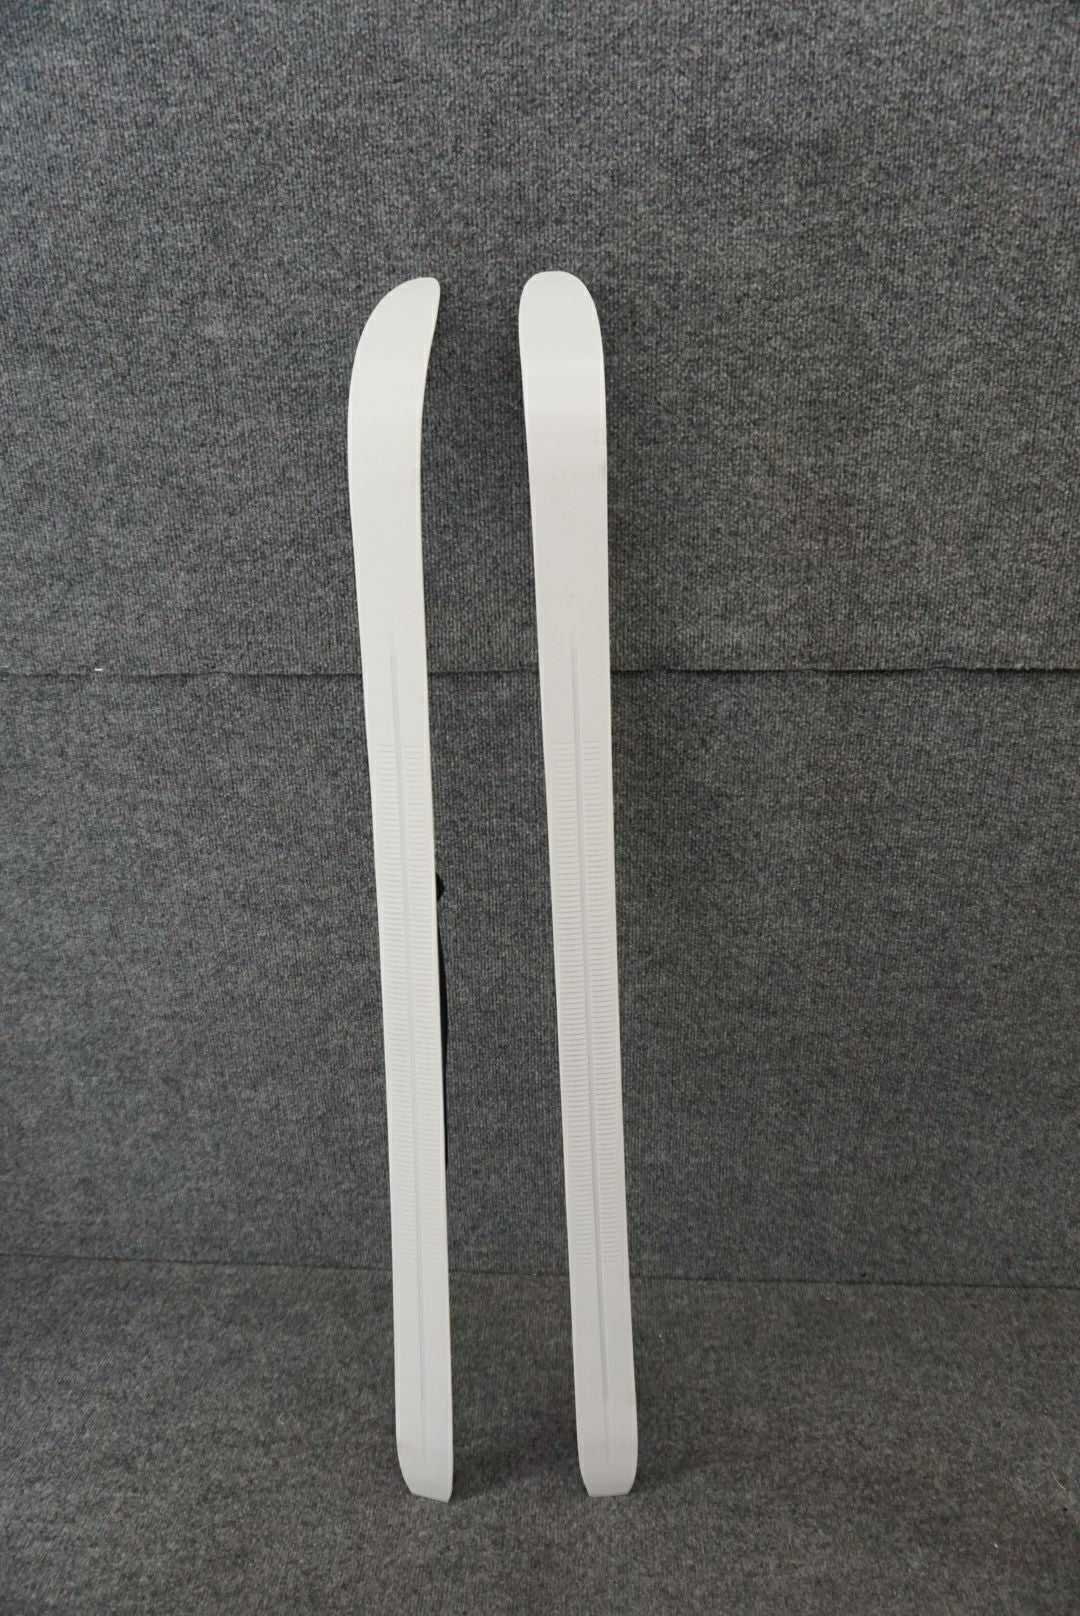 Whitewoods Length 117 cm/46" Cross Country Skis